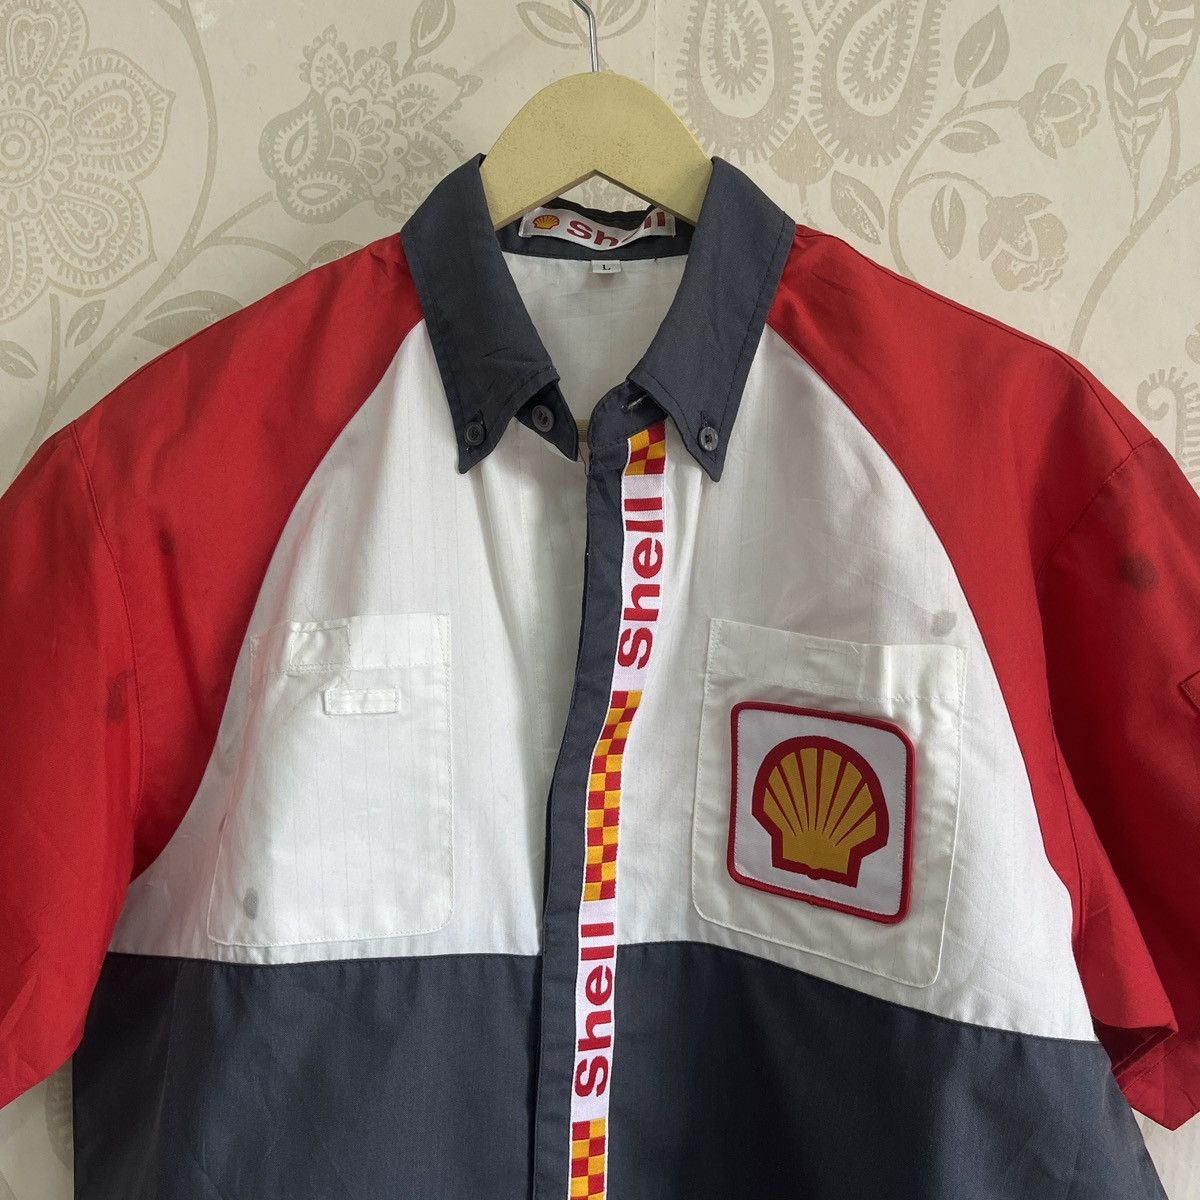 Vintage Shell Workers Uniform Shirts Japan - 17